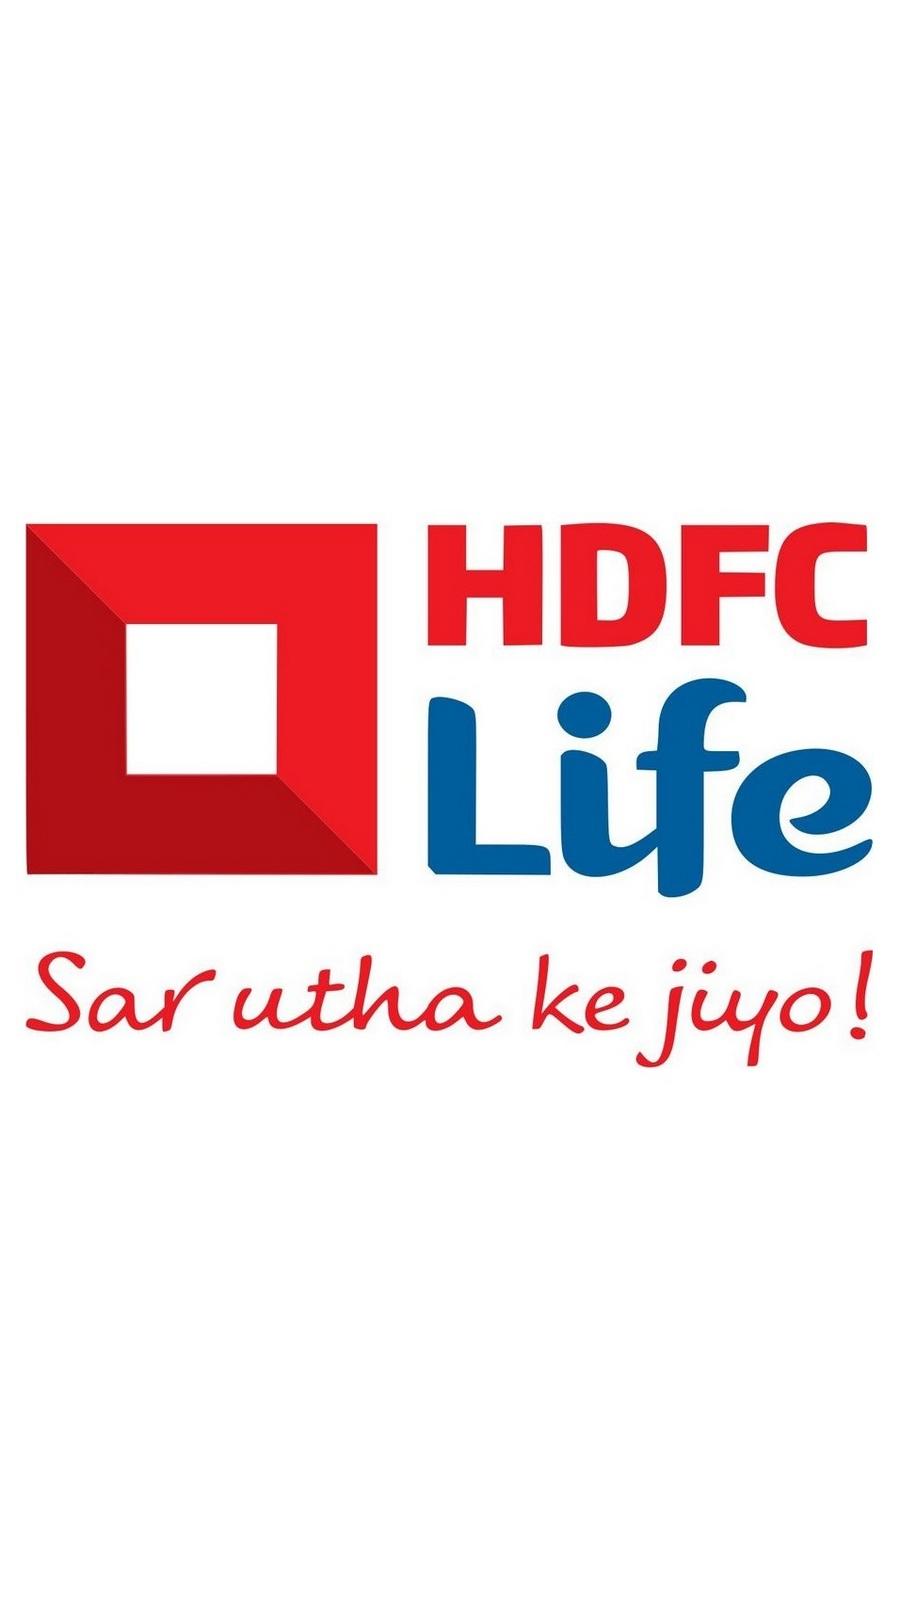 HDFC Life Logo PNG Vector (EPS) Free Download